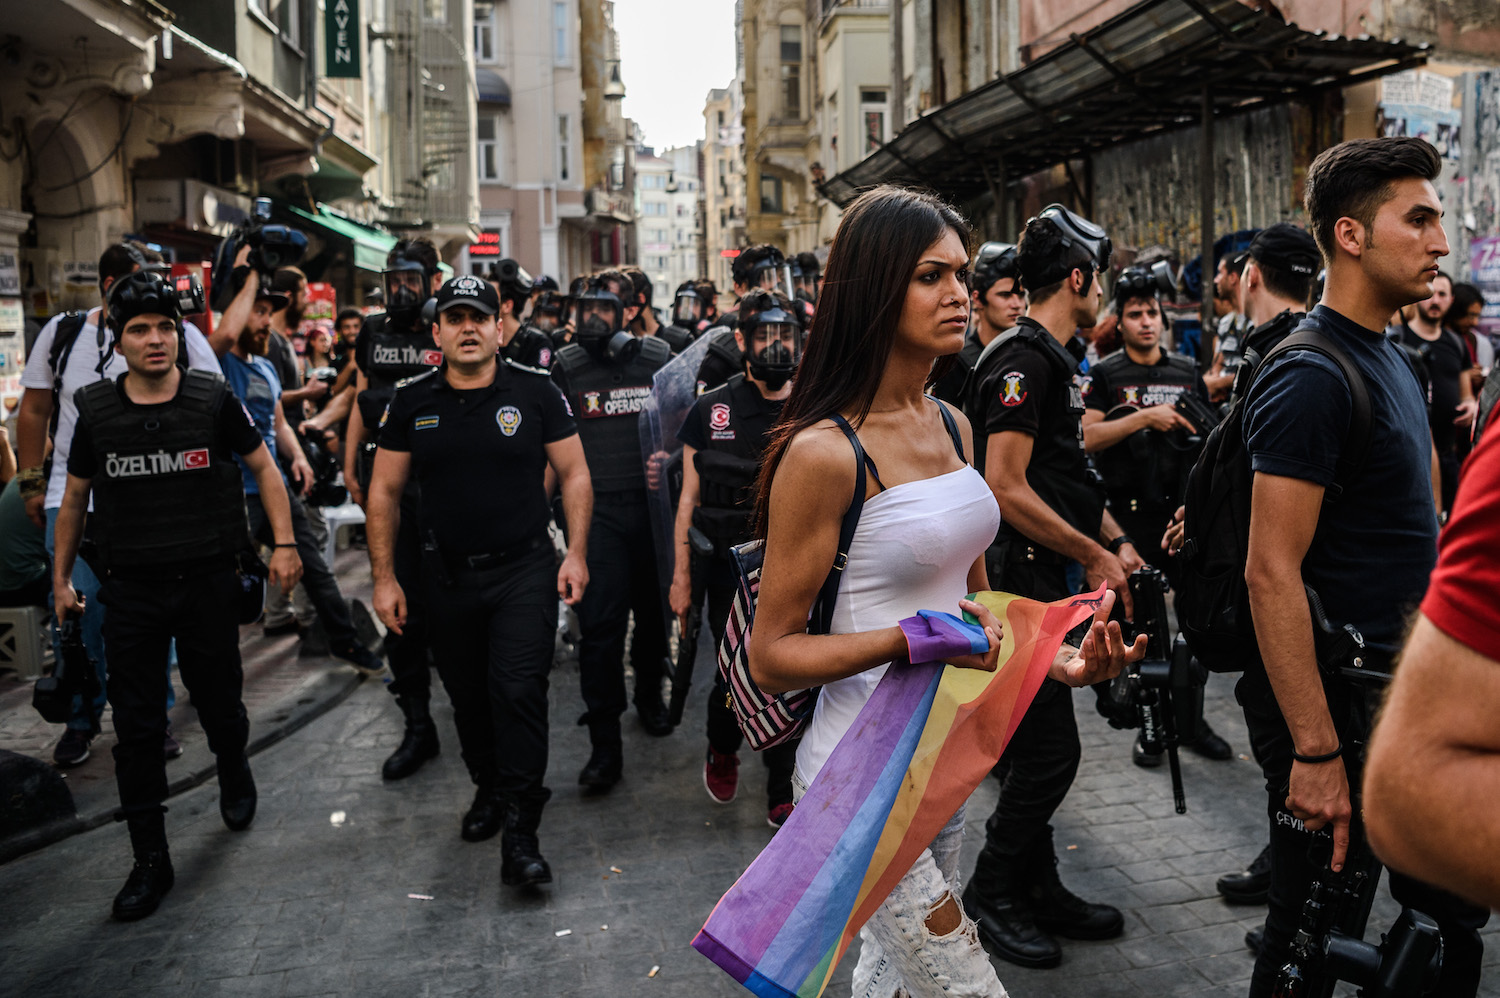 A woman holds a rainbow flag as Turkish anti-riot police officers disperse demonstrators gathered for a rally staged by the LGBT community on Istiklal avenue in Istanbul on June 19, 2016. Turkish riot police fired rubber bullets and tear gas to break up a rally staged by the LGBT community in Istanbul on June 19 in defiance of a ban. Several hundred police surrounded the main Taksim Square -- where all demonstrations have been banned since 2013 -- to prevent the "Trans Pride" event taking place during Ramadan.  / AFP / OZAN KOSE        (Photo credit should read OZAN KOSE/AFP/Getty Images)